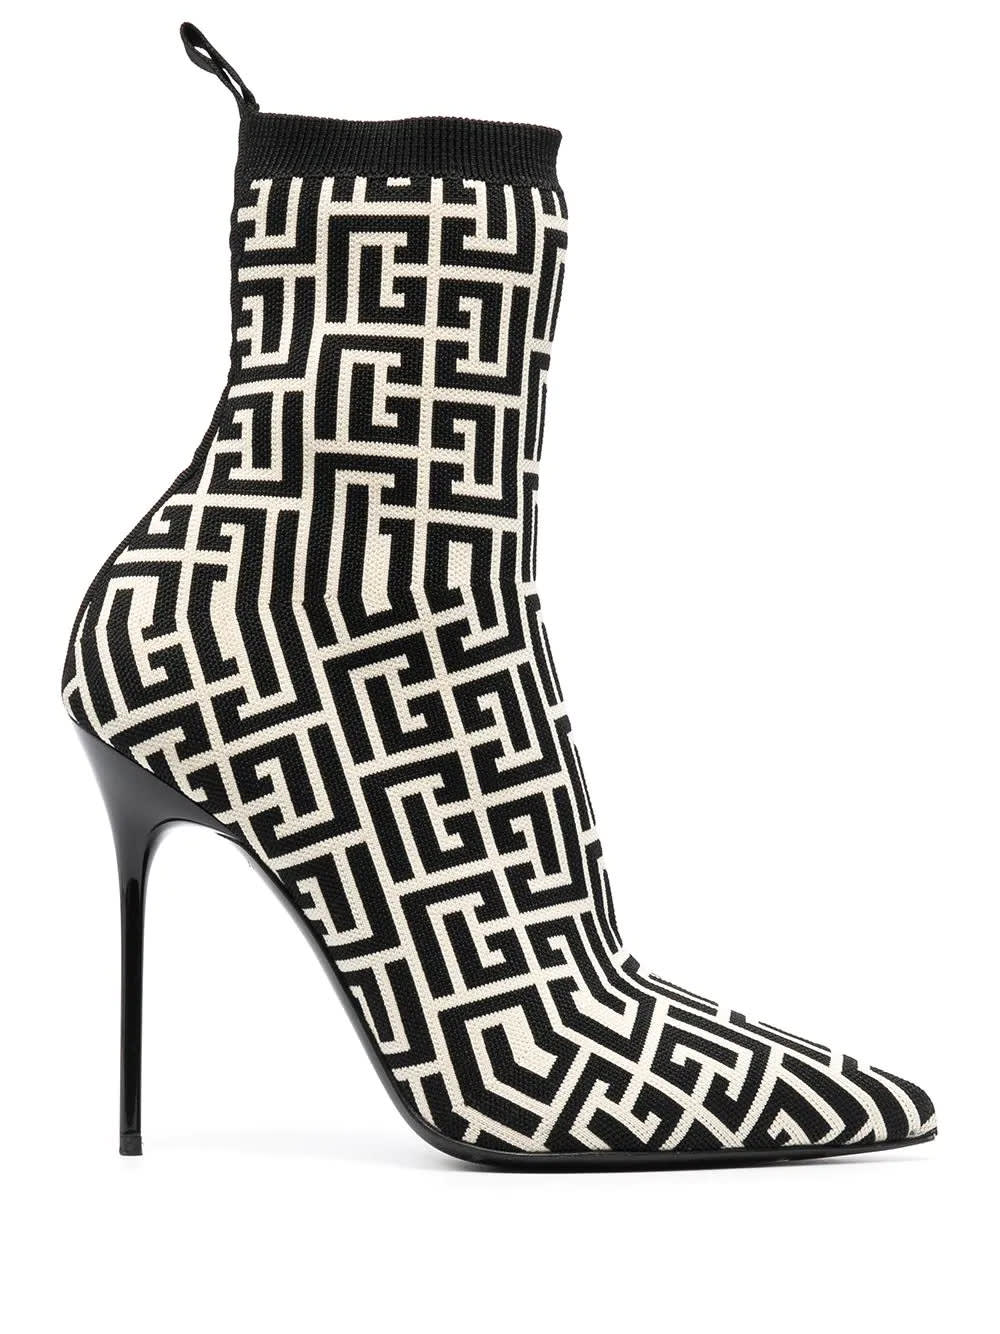 Balmain Skye Ankle Boot In Two-tone Black And Ivory Stretch Knit With Monogram